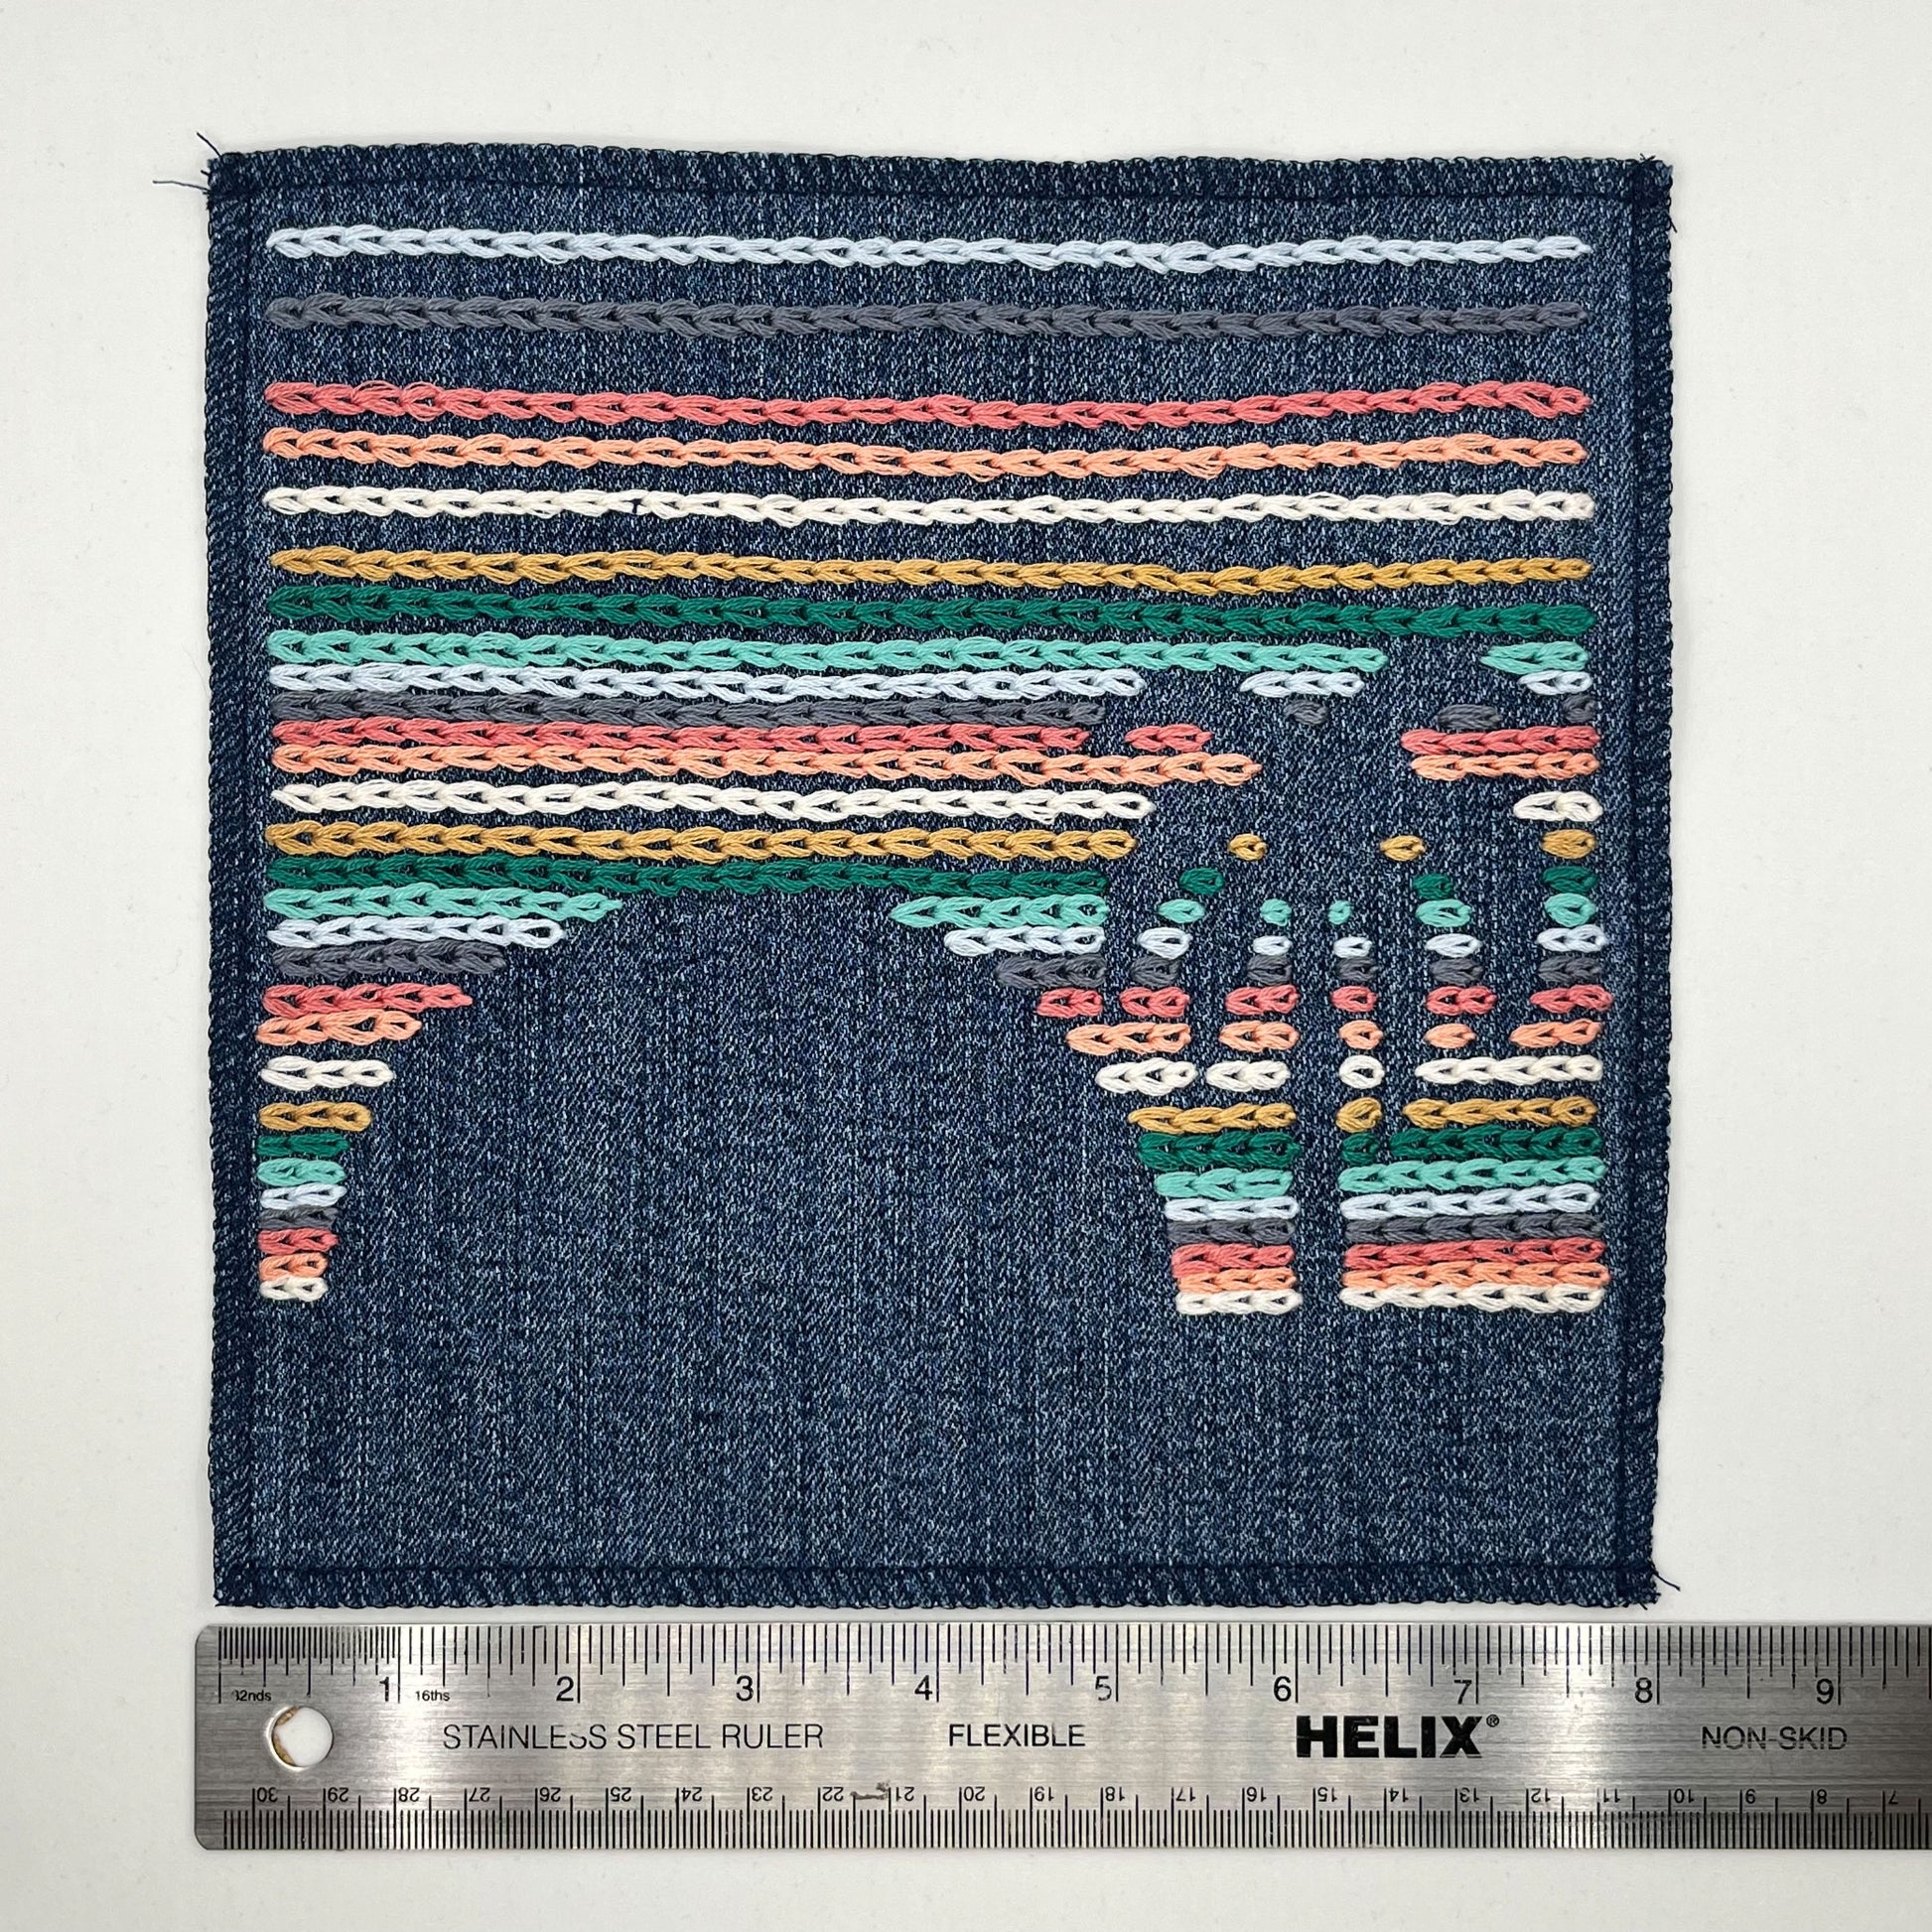 a large square denim patch, hand stitched with rows of chainstitch, with negative space showing the shapes of a palm tree next to a setting sun, with peach, coral, grey, light blue, green and mustard thread, next to a ruler showing a width of 8 in